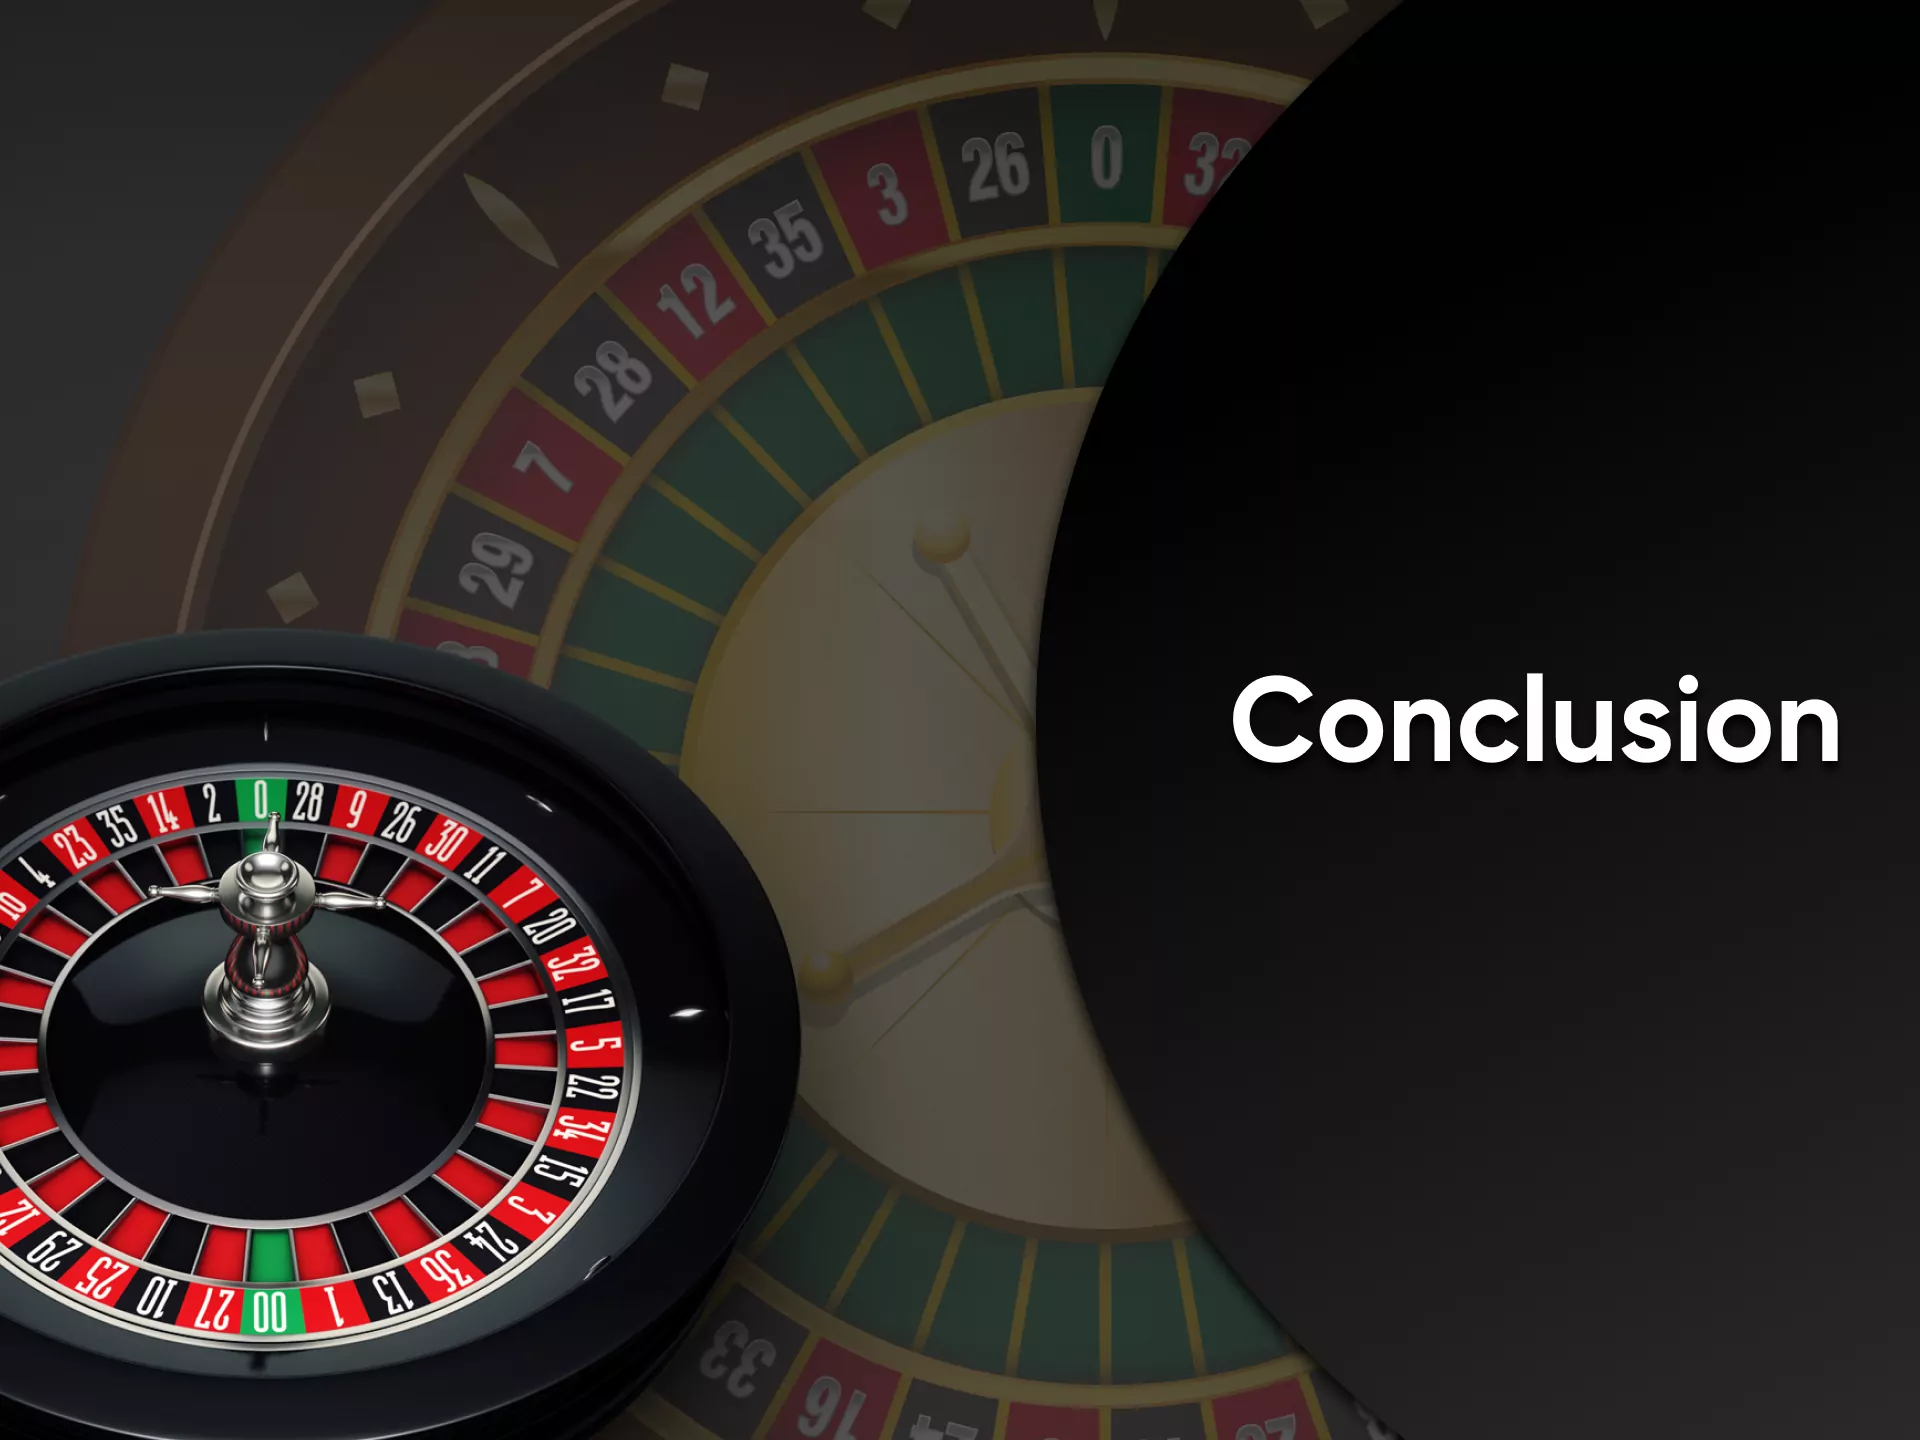 Have a good time playing online roulette.